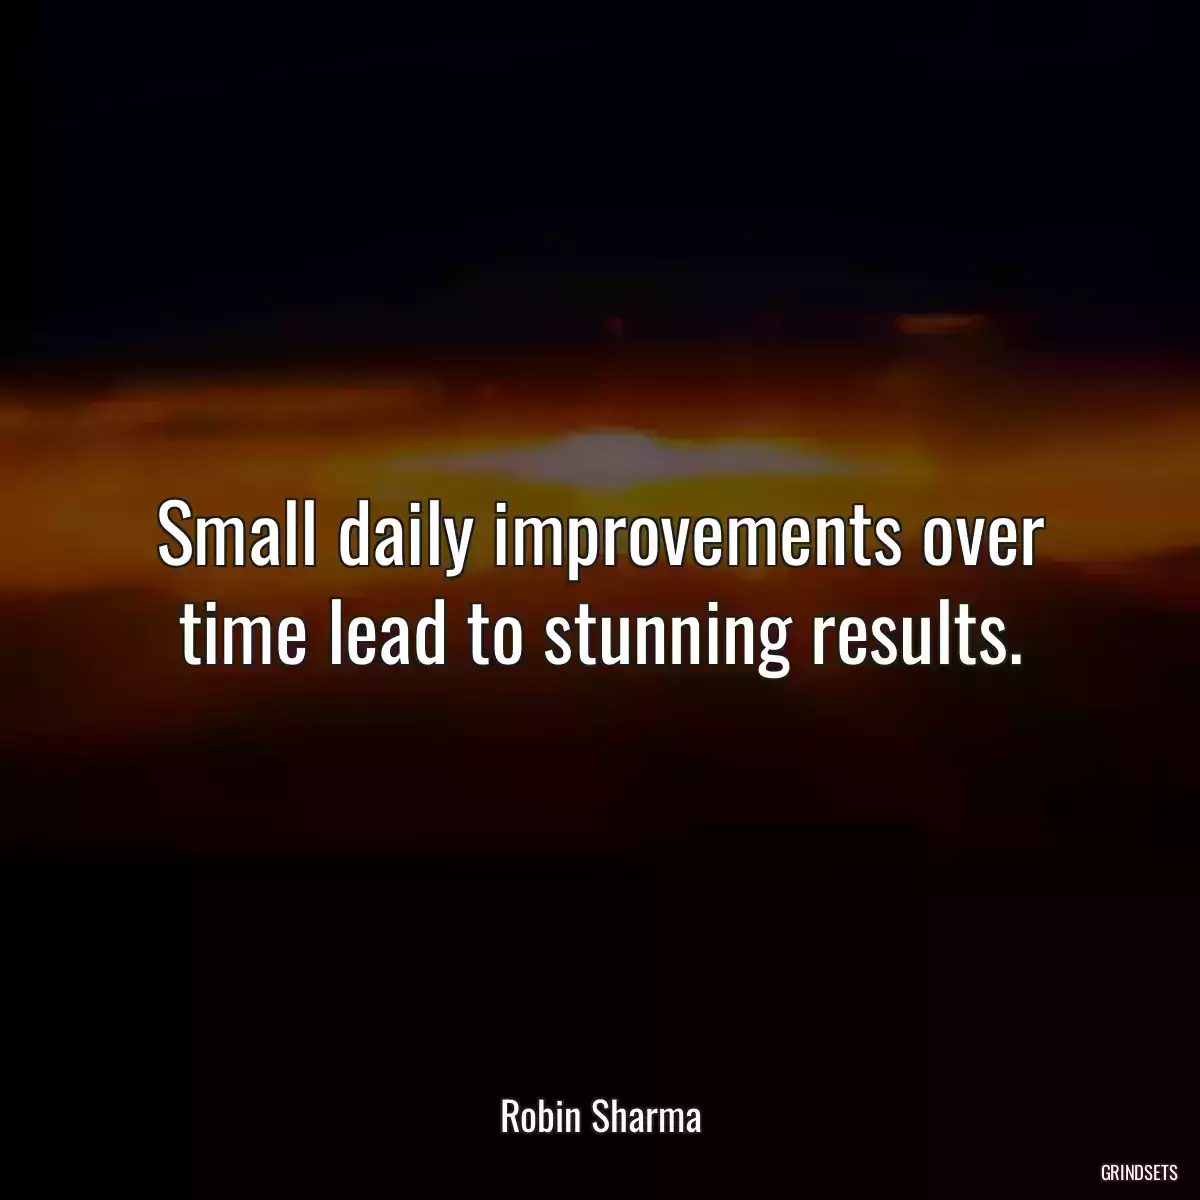 Small daily improvements over time lead to stunning results.